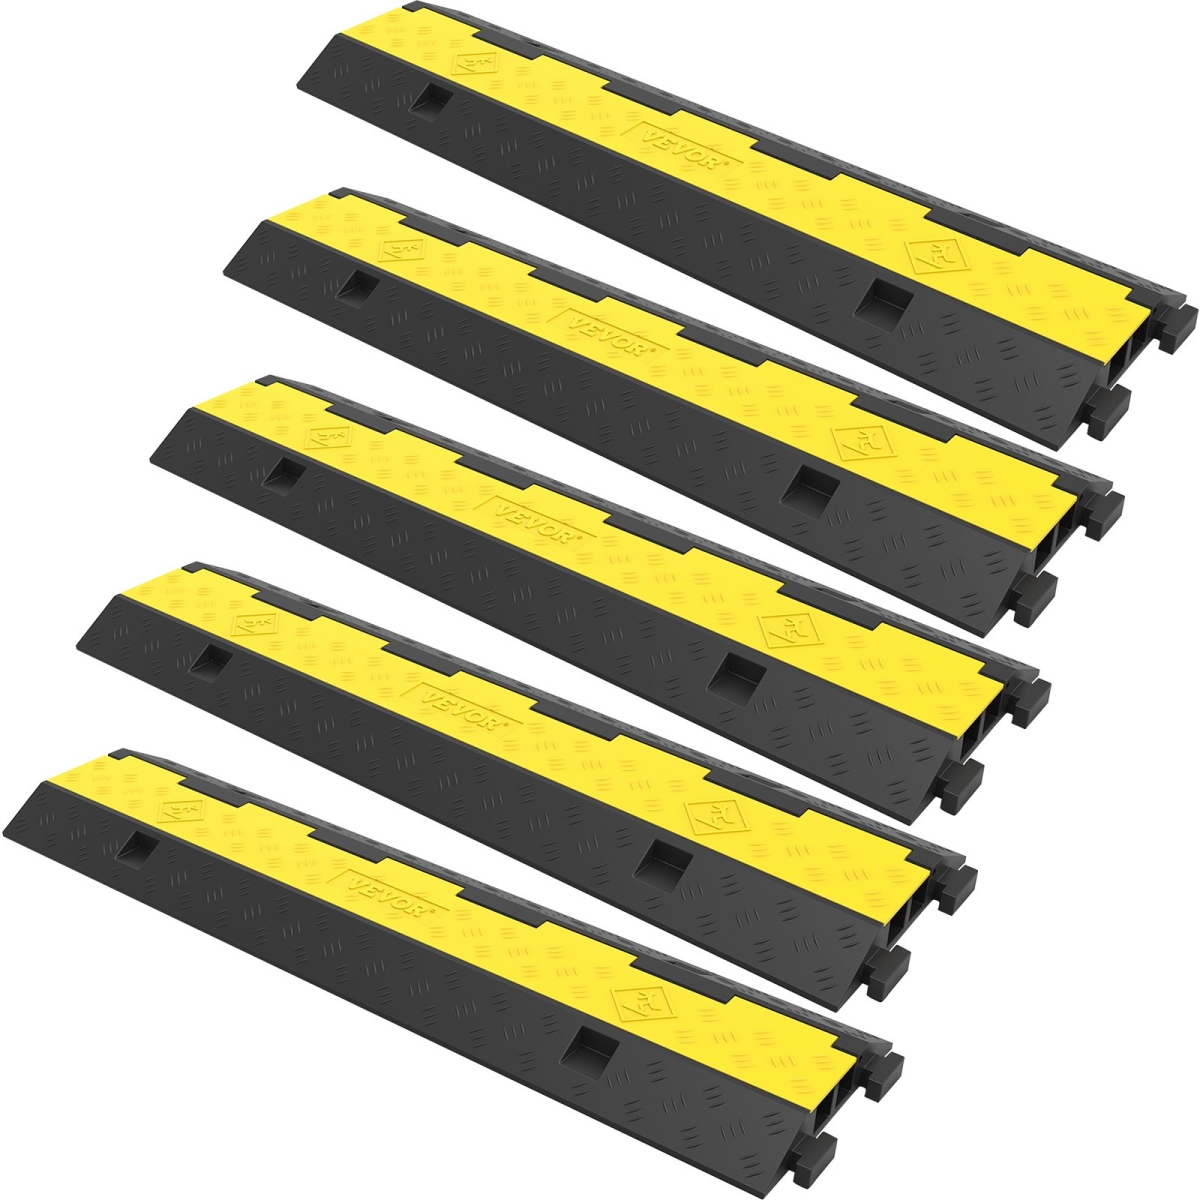 Picture of Vevor DLBHQXSLX5PCSZUIBV0 11000 lbs Cable Protector Ramp - Pack of 5